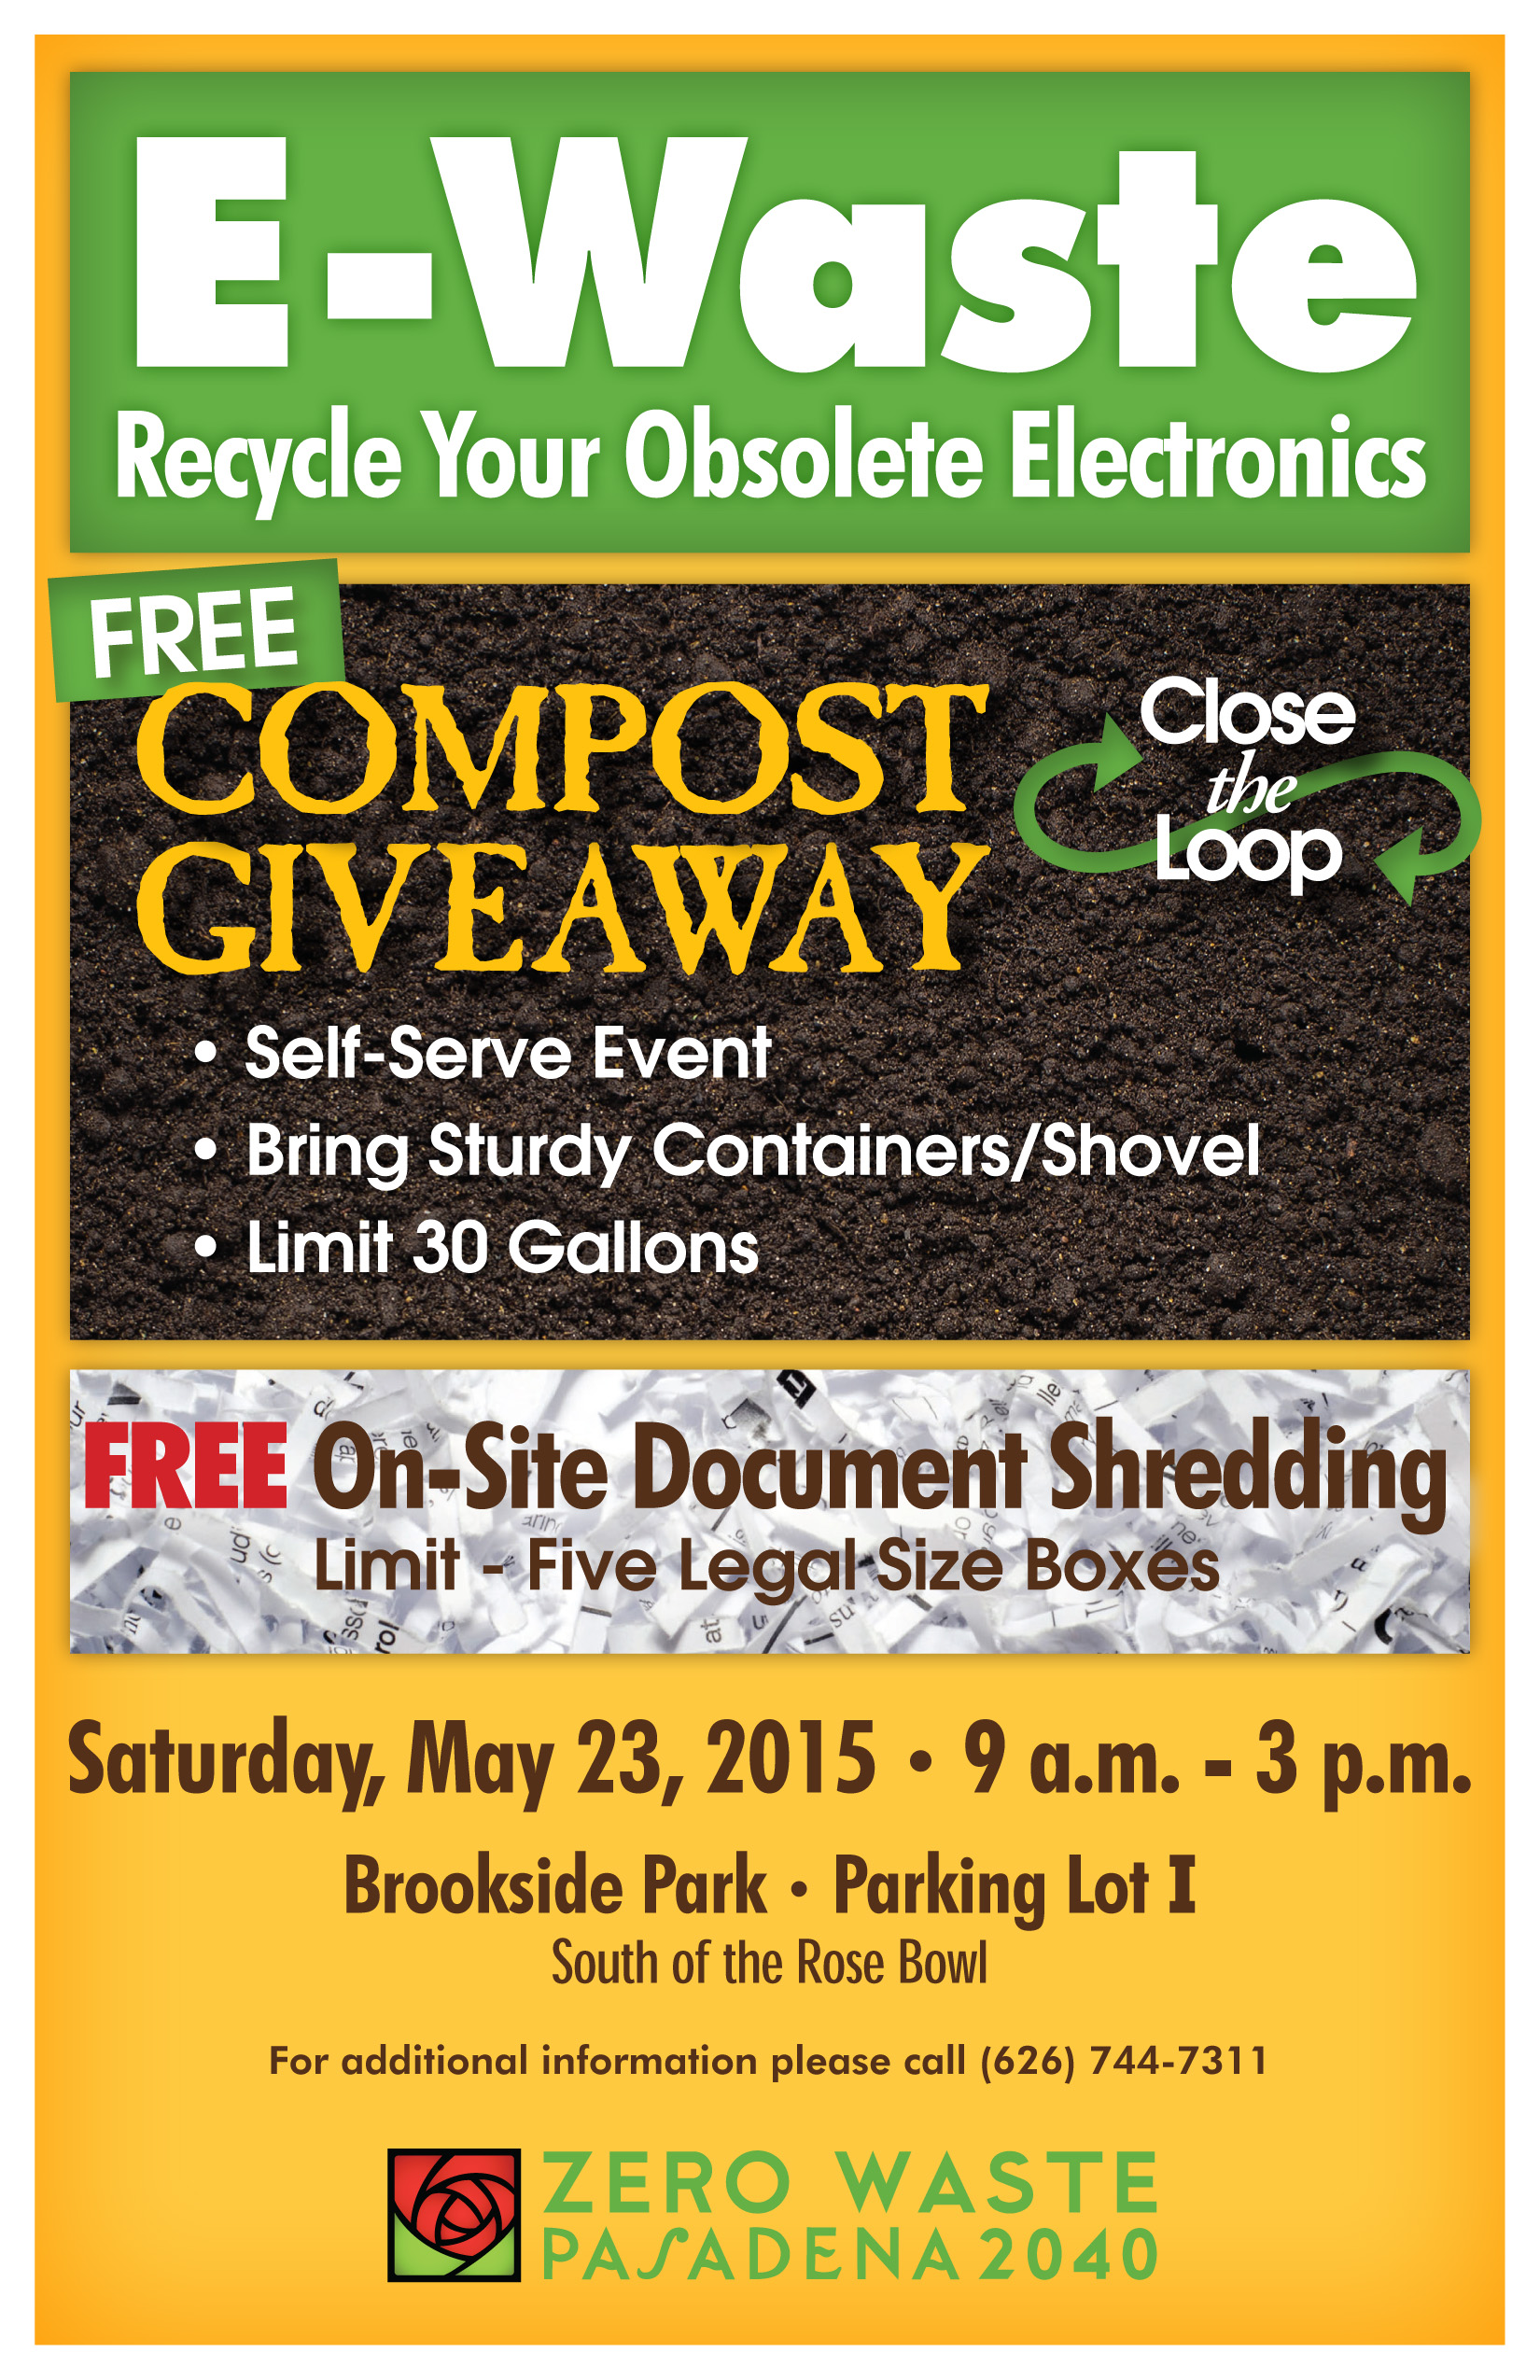 E-Waste Recycling, Document Shredding & Compost Giveaway Flyer May 2015-1